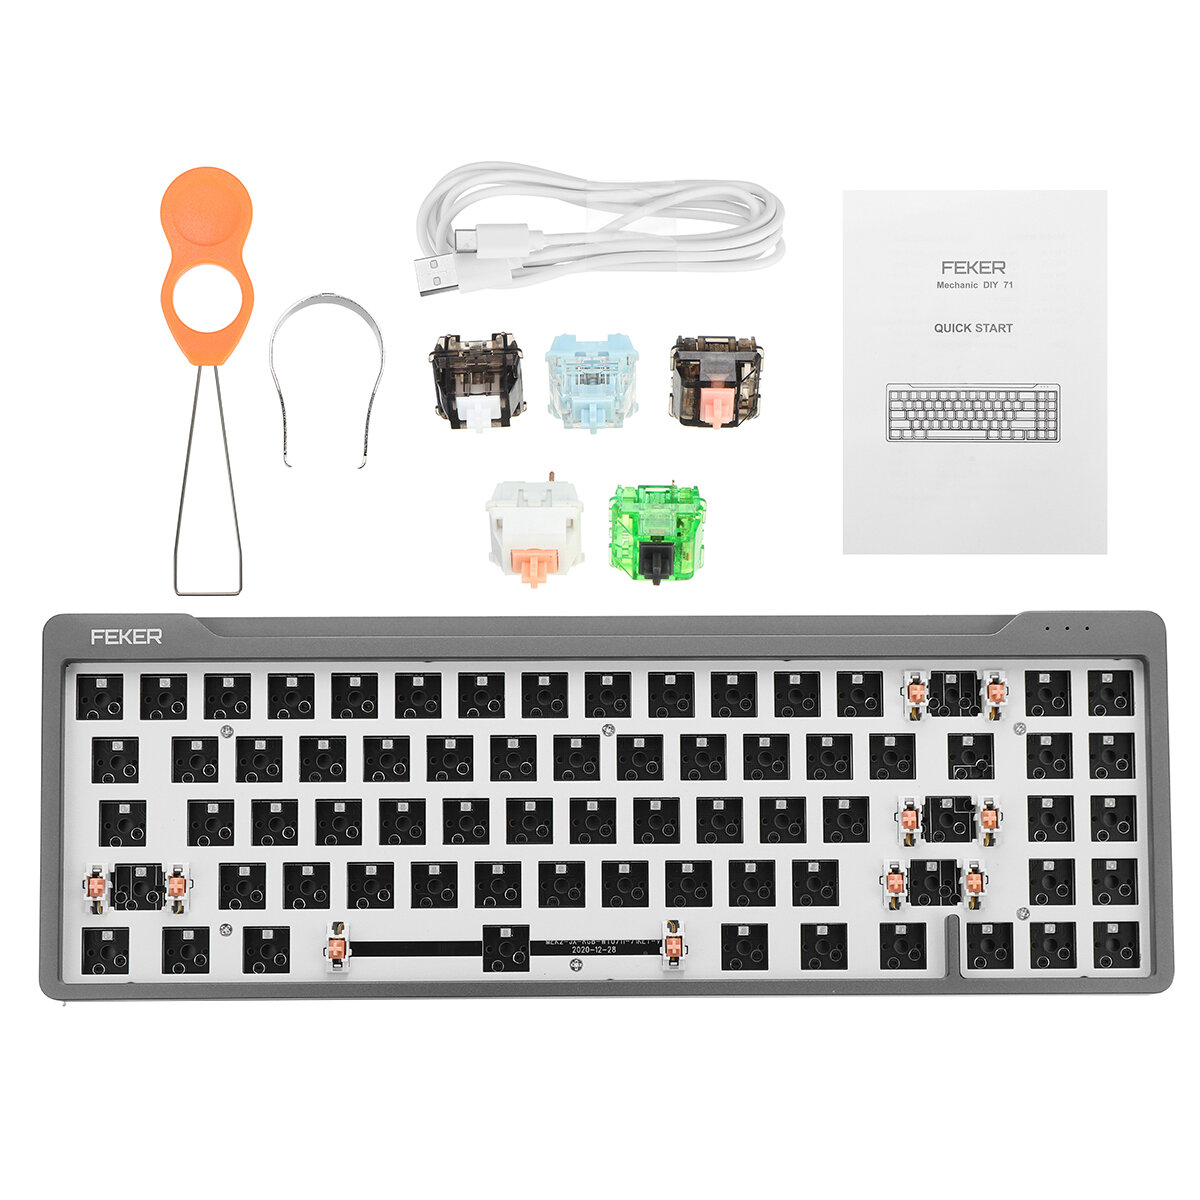 FEKER 70% Layout Keyboard Kit Hot Swappable NKRO RGB Backlight Type-C Wired PCB Mounting Plate CNC Anodized Aluminum Cas